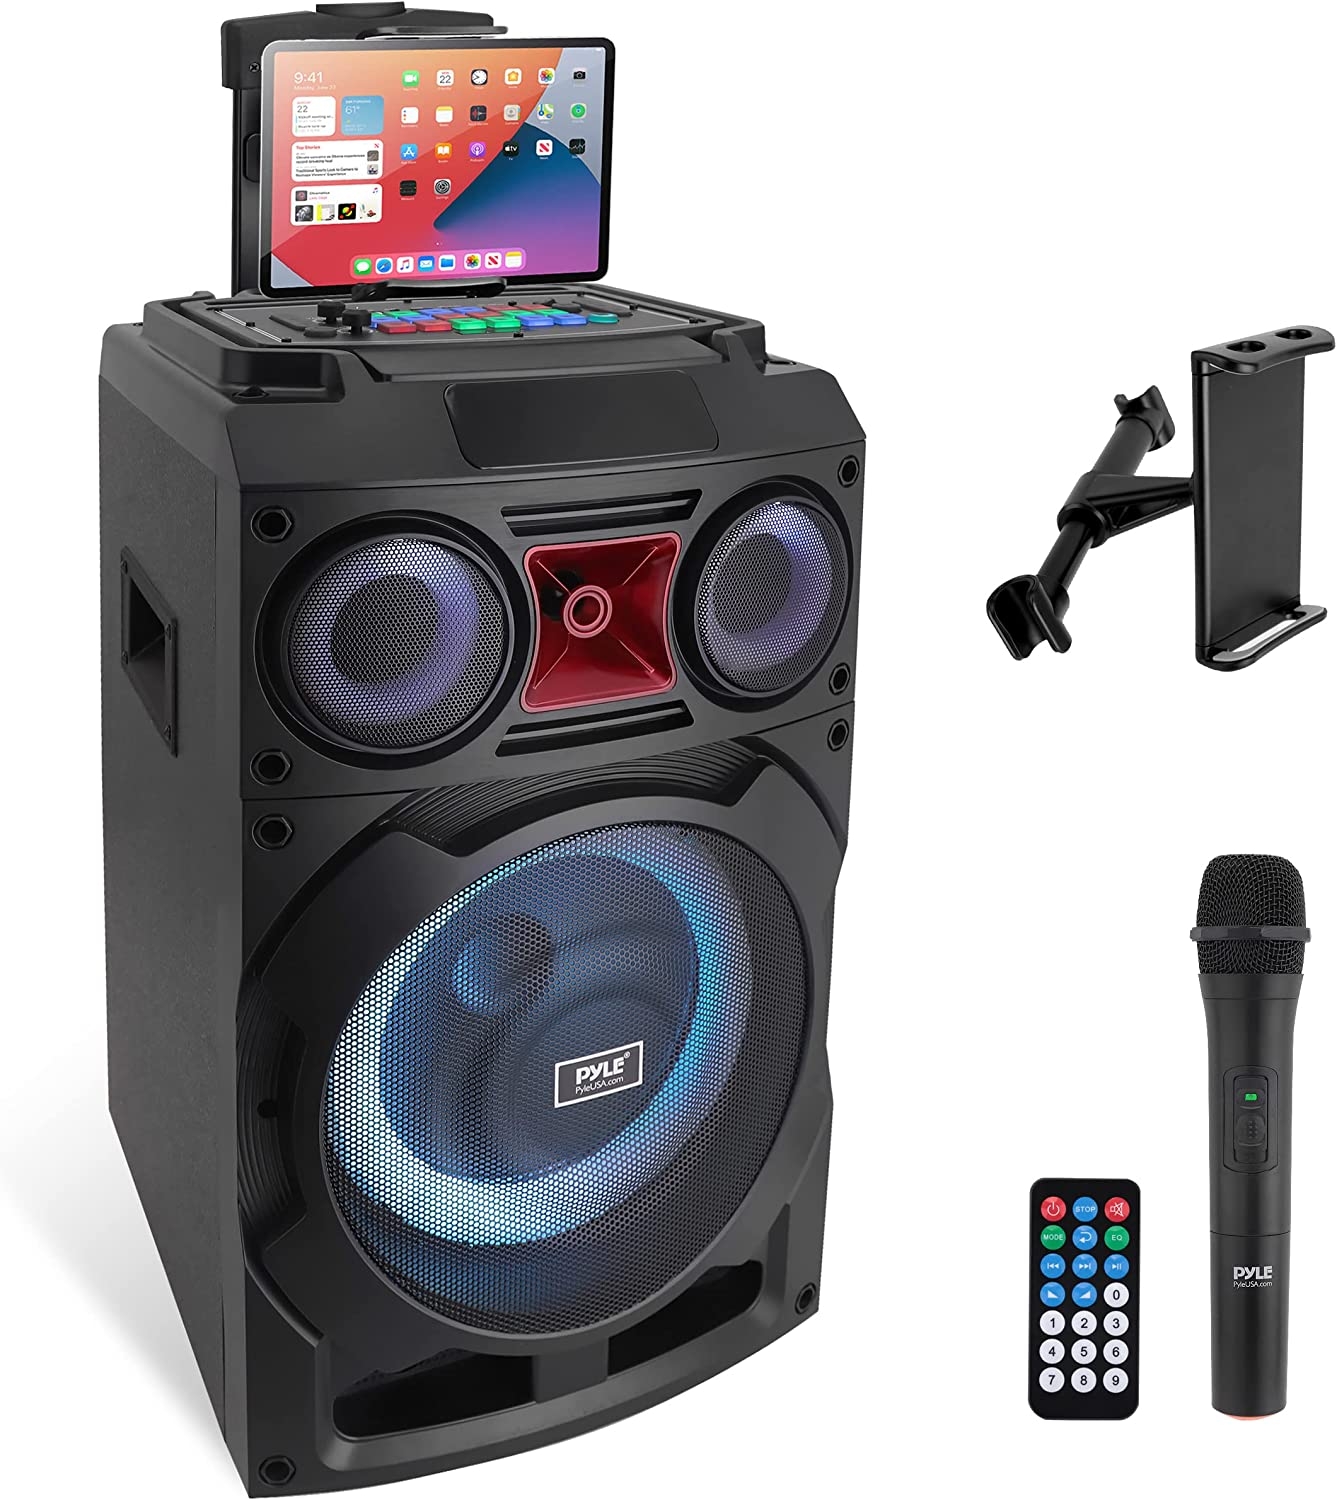 Pyle Portable Bluetooth PA Speaker System-600W 10” Indoor/Outdoor BT  Speaker-Includes 2 Wireless Microphones, Party Lights, USB SD Card Reader,  FM